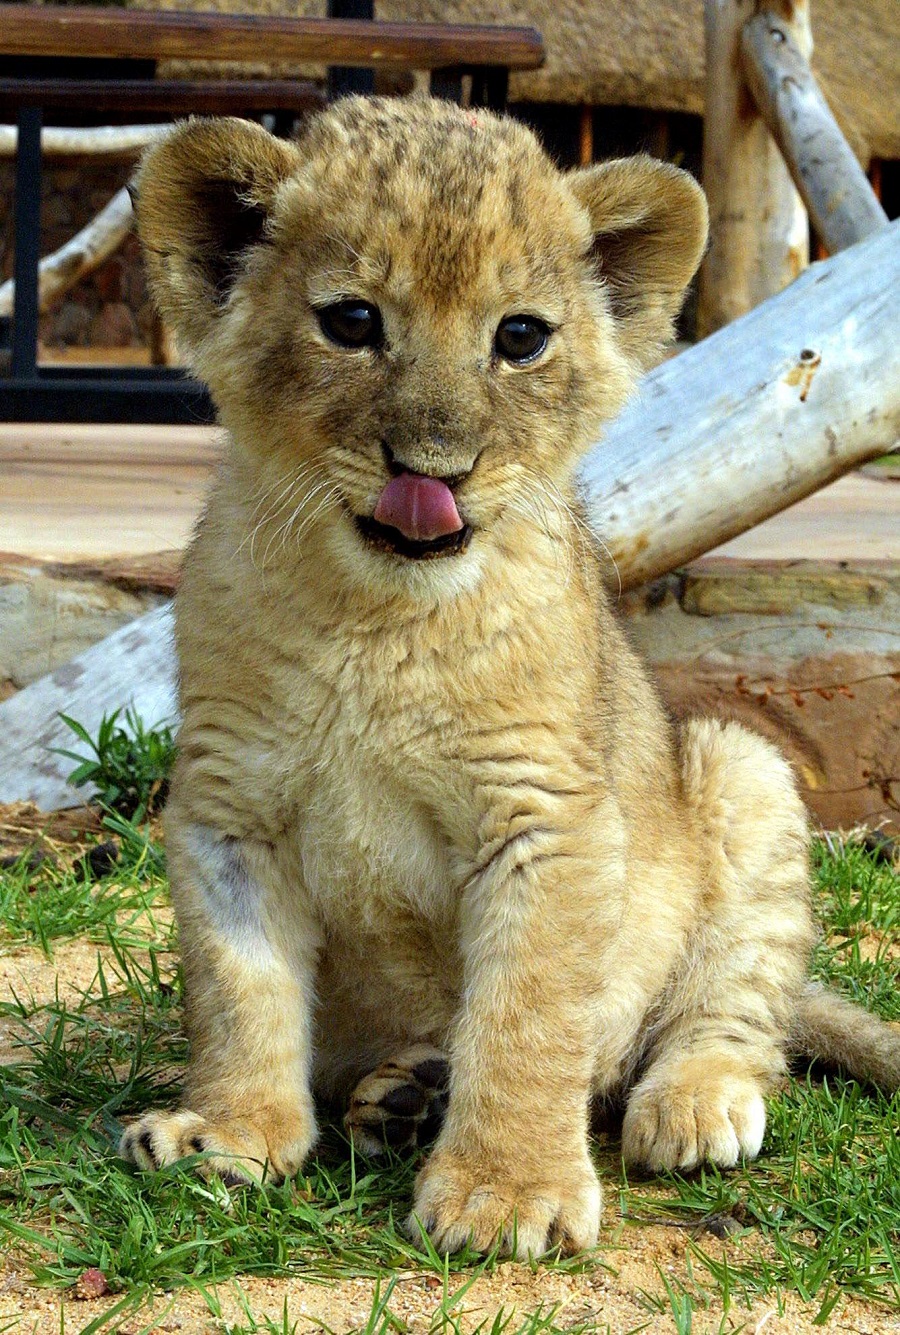 Beautiful Photos of Lion Cubs You Must Not Miss - Utterly Cute Yet ...